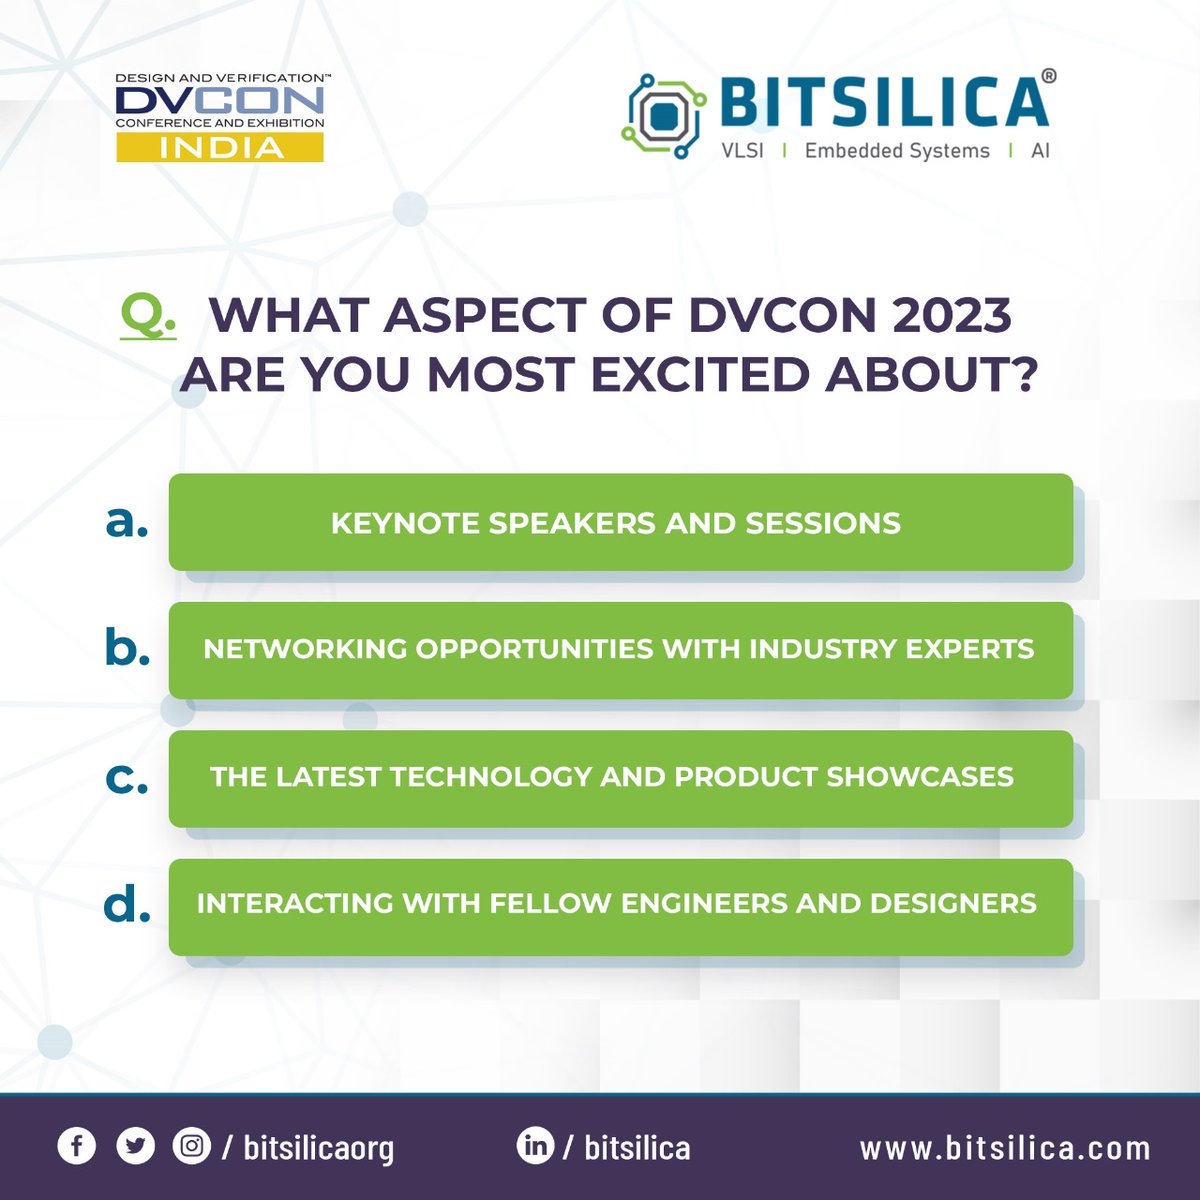 DV Con is just around the corner and the excitement it at an all time high! Let us know in the comments what you are looking forward to ?! 

#BITSILICA, #VLSI, #Semiconductors, #Embedded, #AI #VLSIJobs #Technology #CareerGrowth #dvcon2023 #dvcon #corportaeevent #vlsiverification